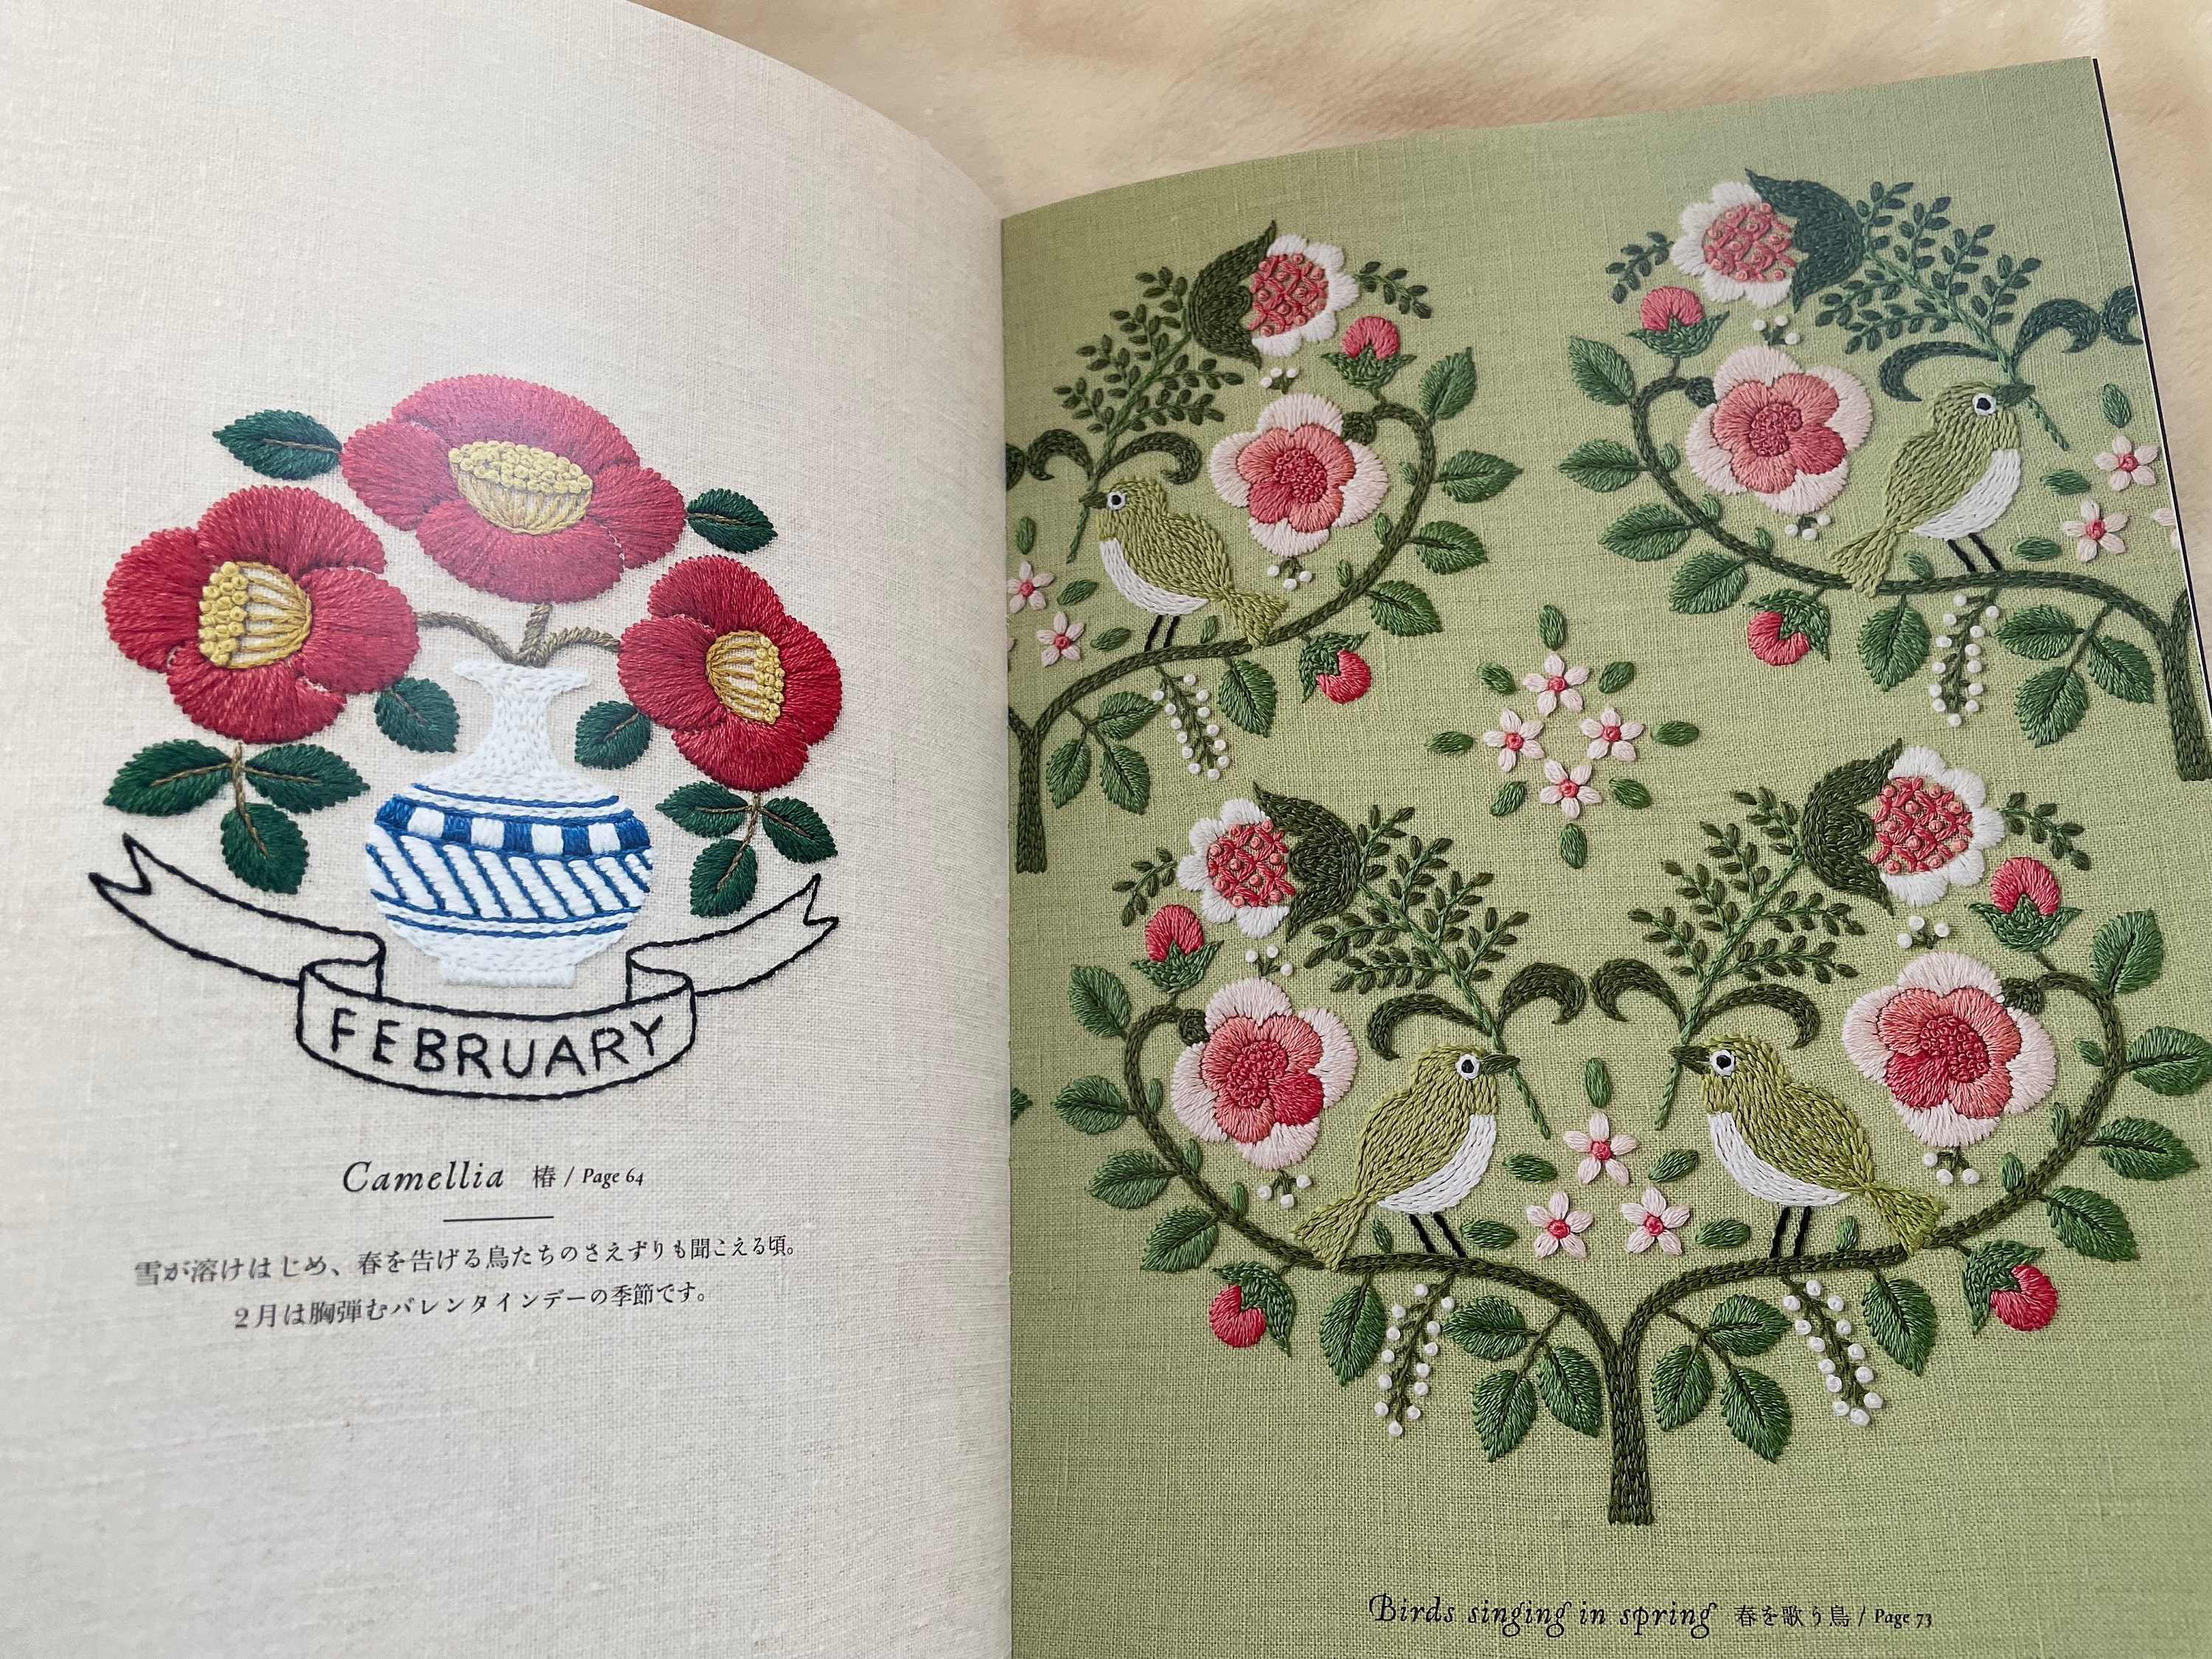 Japanese Paper Notebooks Featuring Vintage Science Illustrations Merged  with Hand-embroidery — Colossal